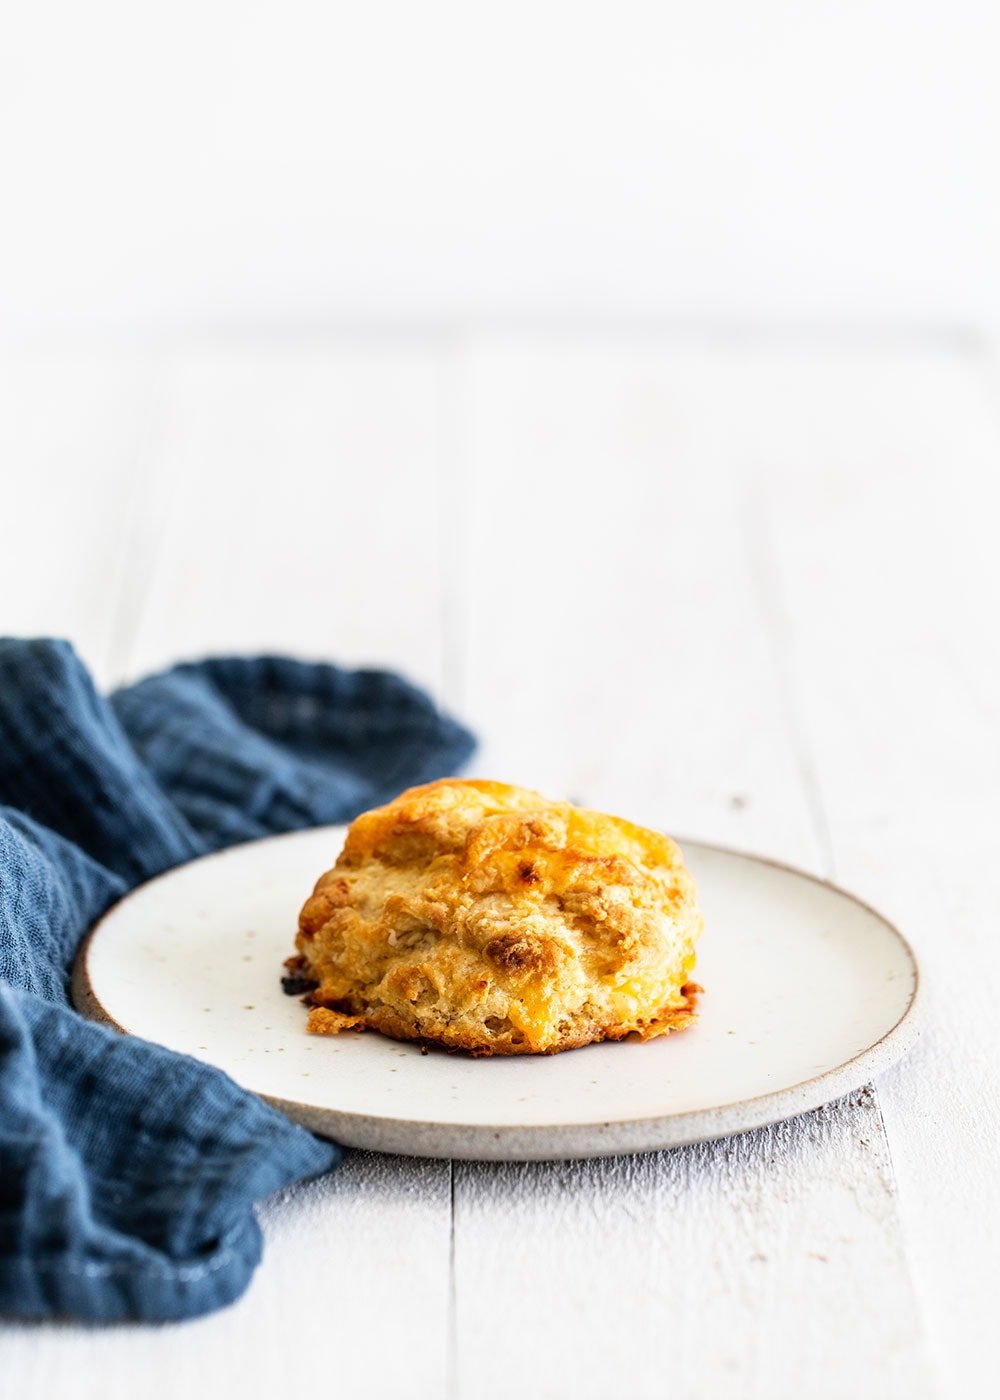 Flaky cheesy cheddar biscuit on a plate with a napkin